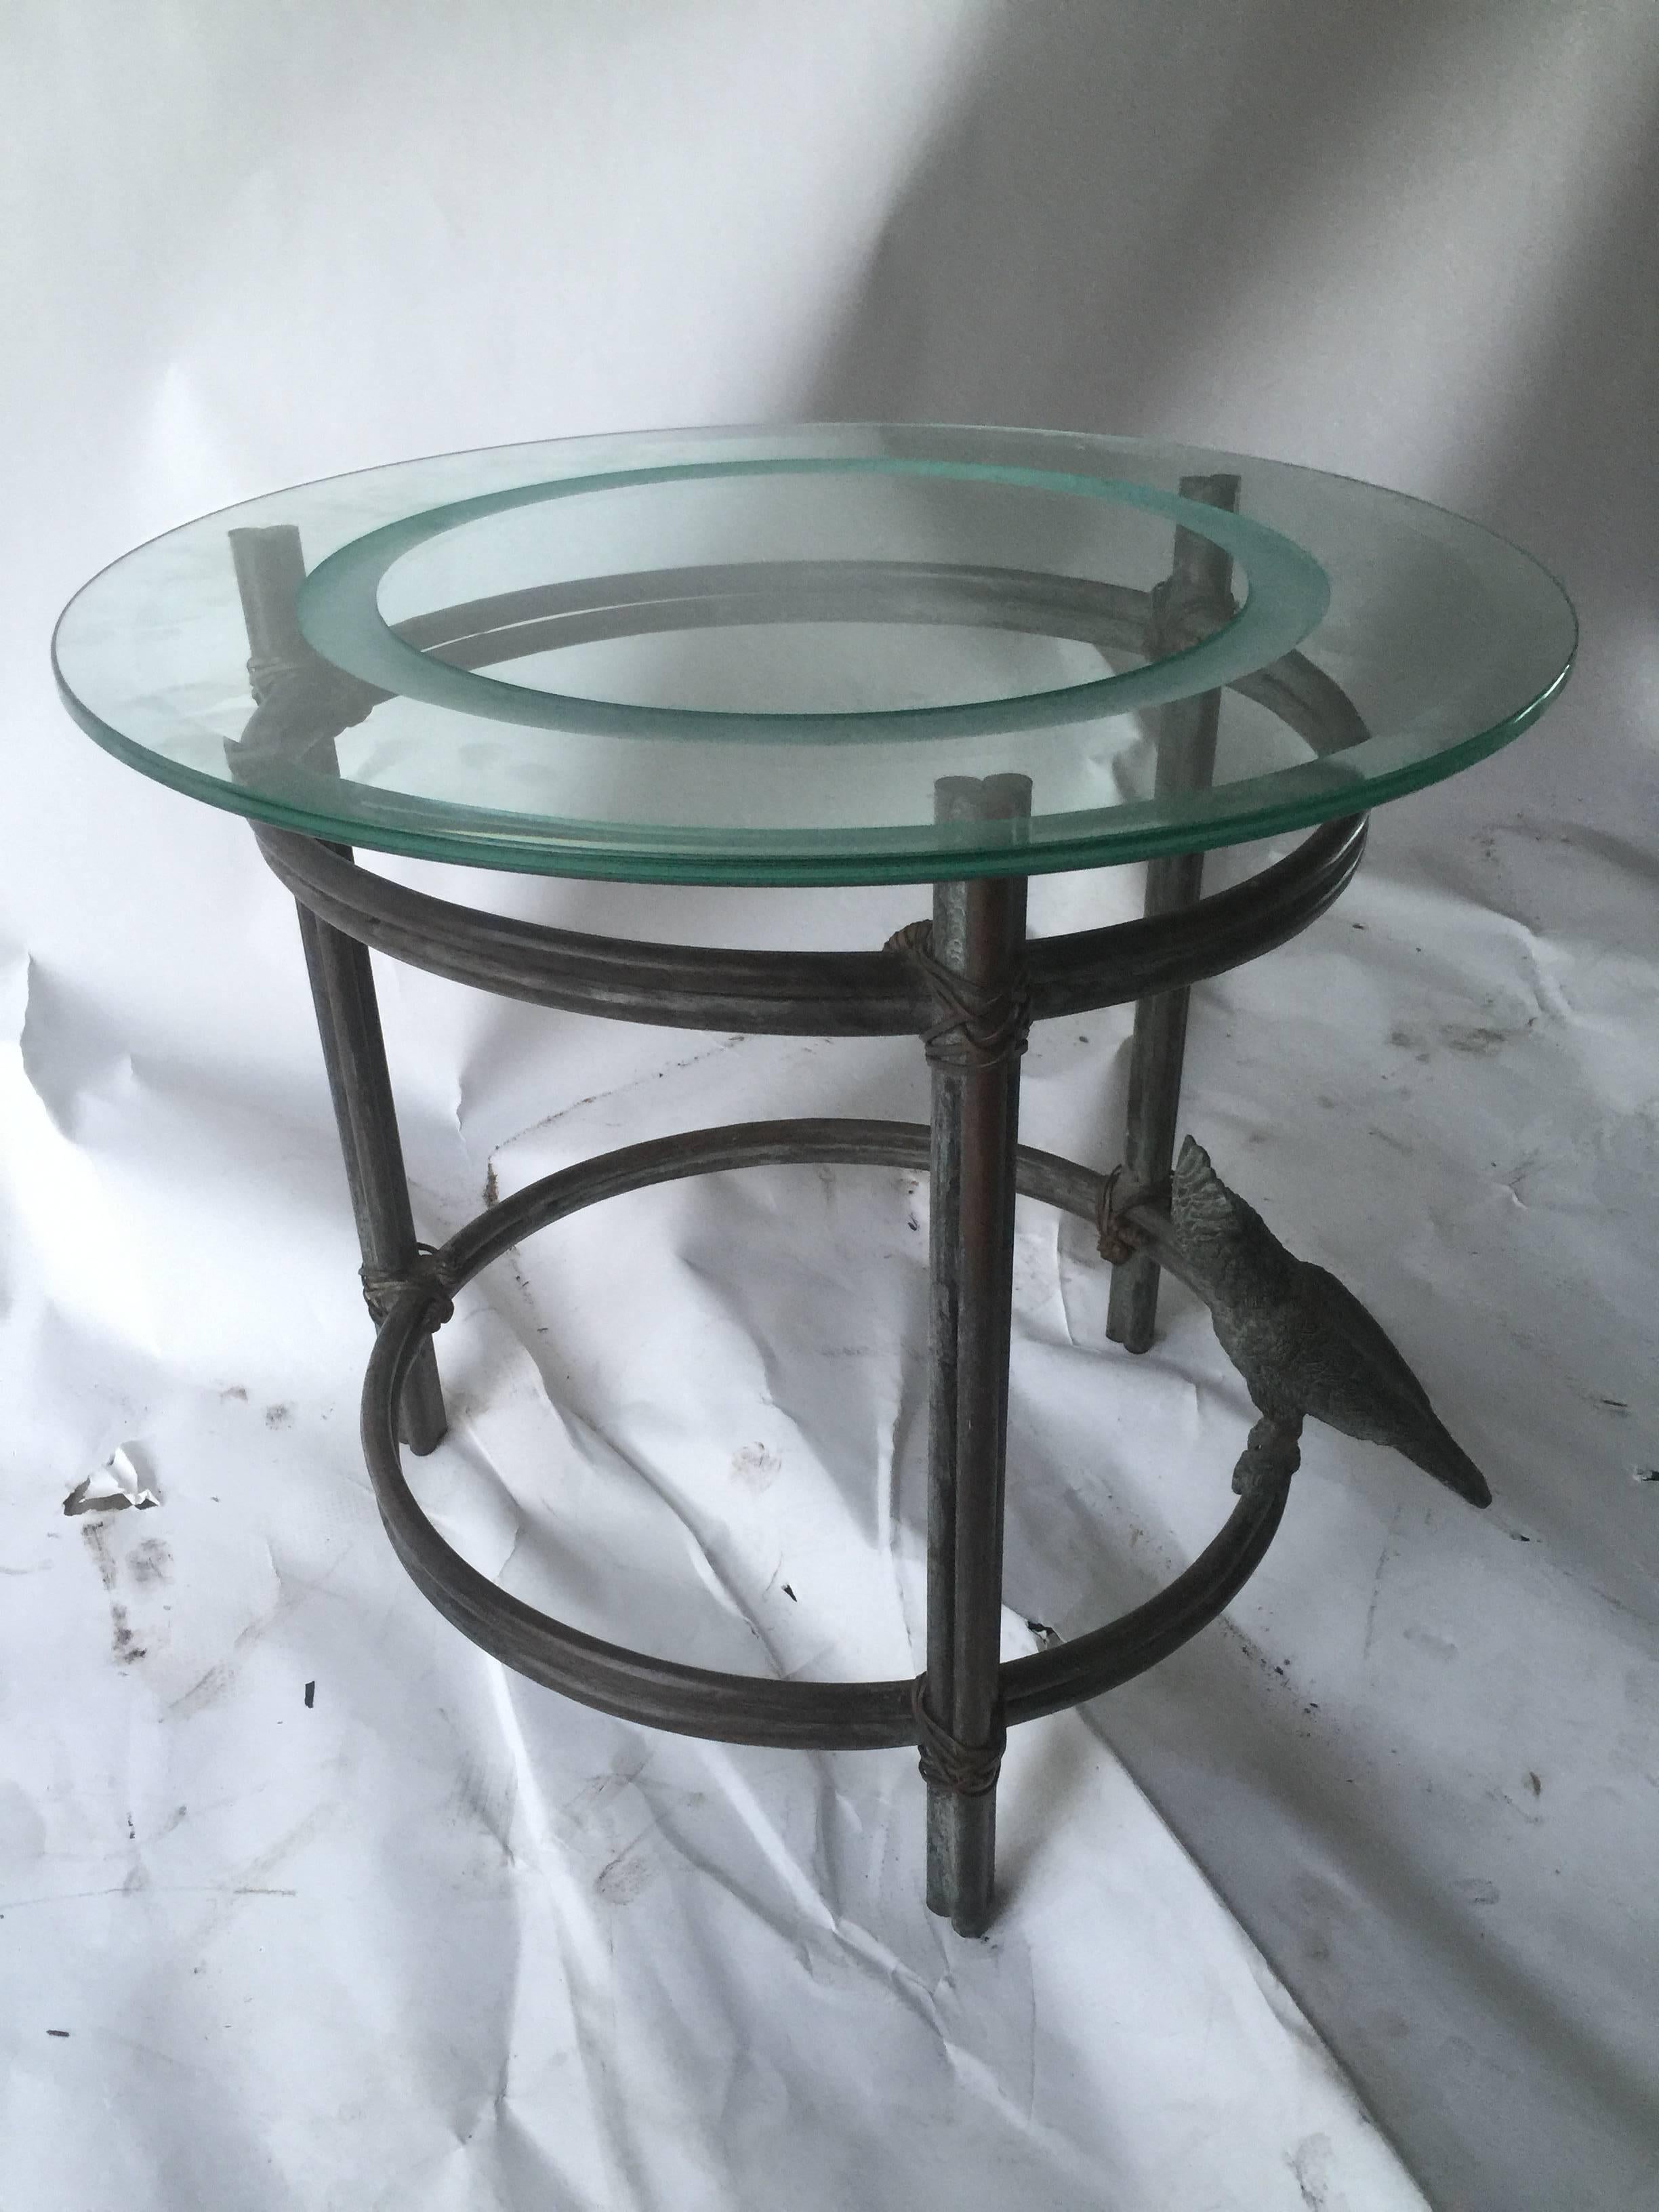 Interesting and well cast bronze accent table designed in a branch form with a cockatoo perched on one side. Having a nice beveled glass top with an etched circle design in the center. Done in the 1970s this is an organic and modernistic form